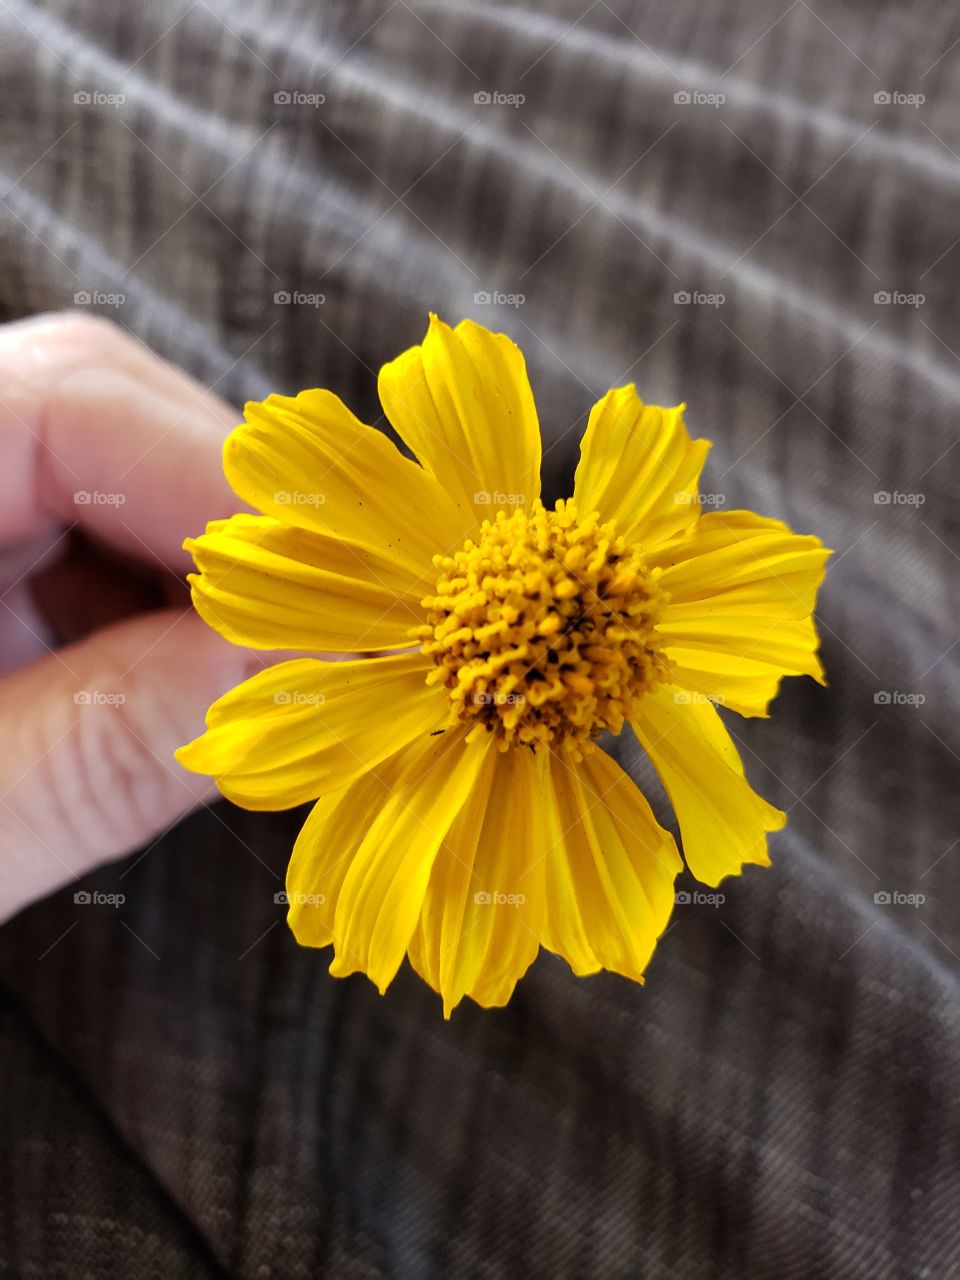 a flower picked by my son